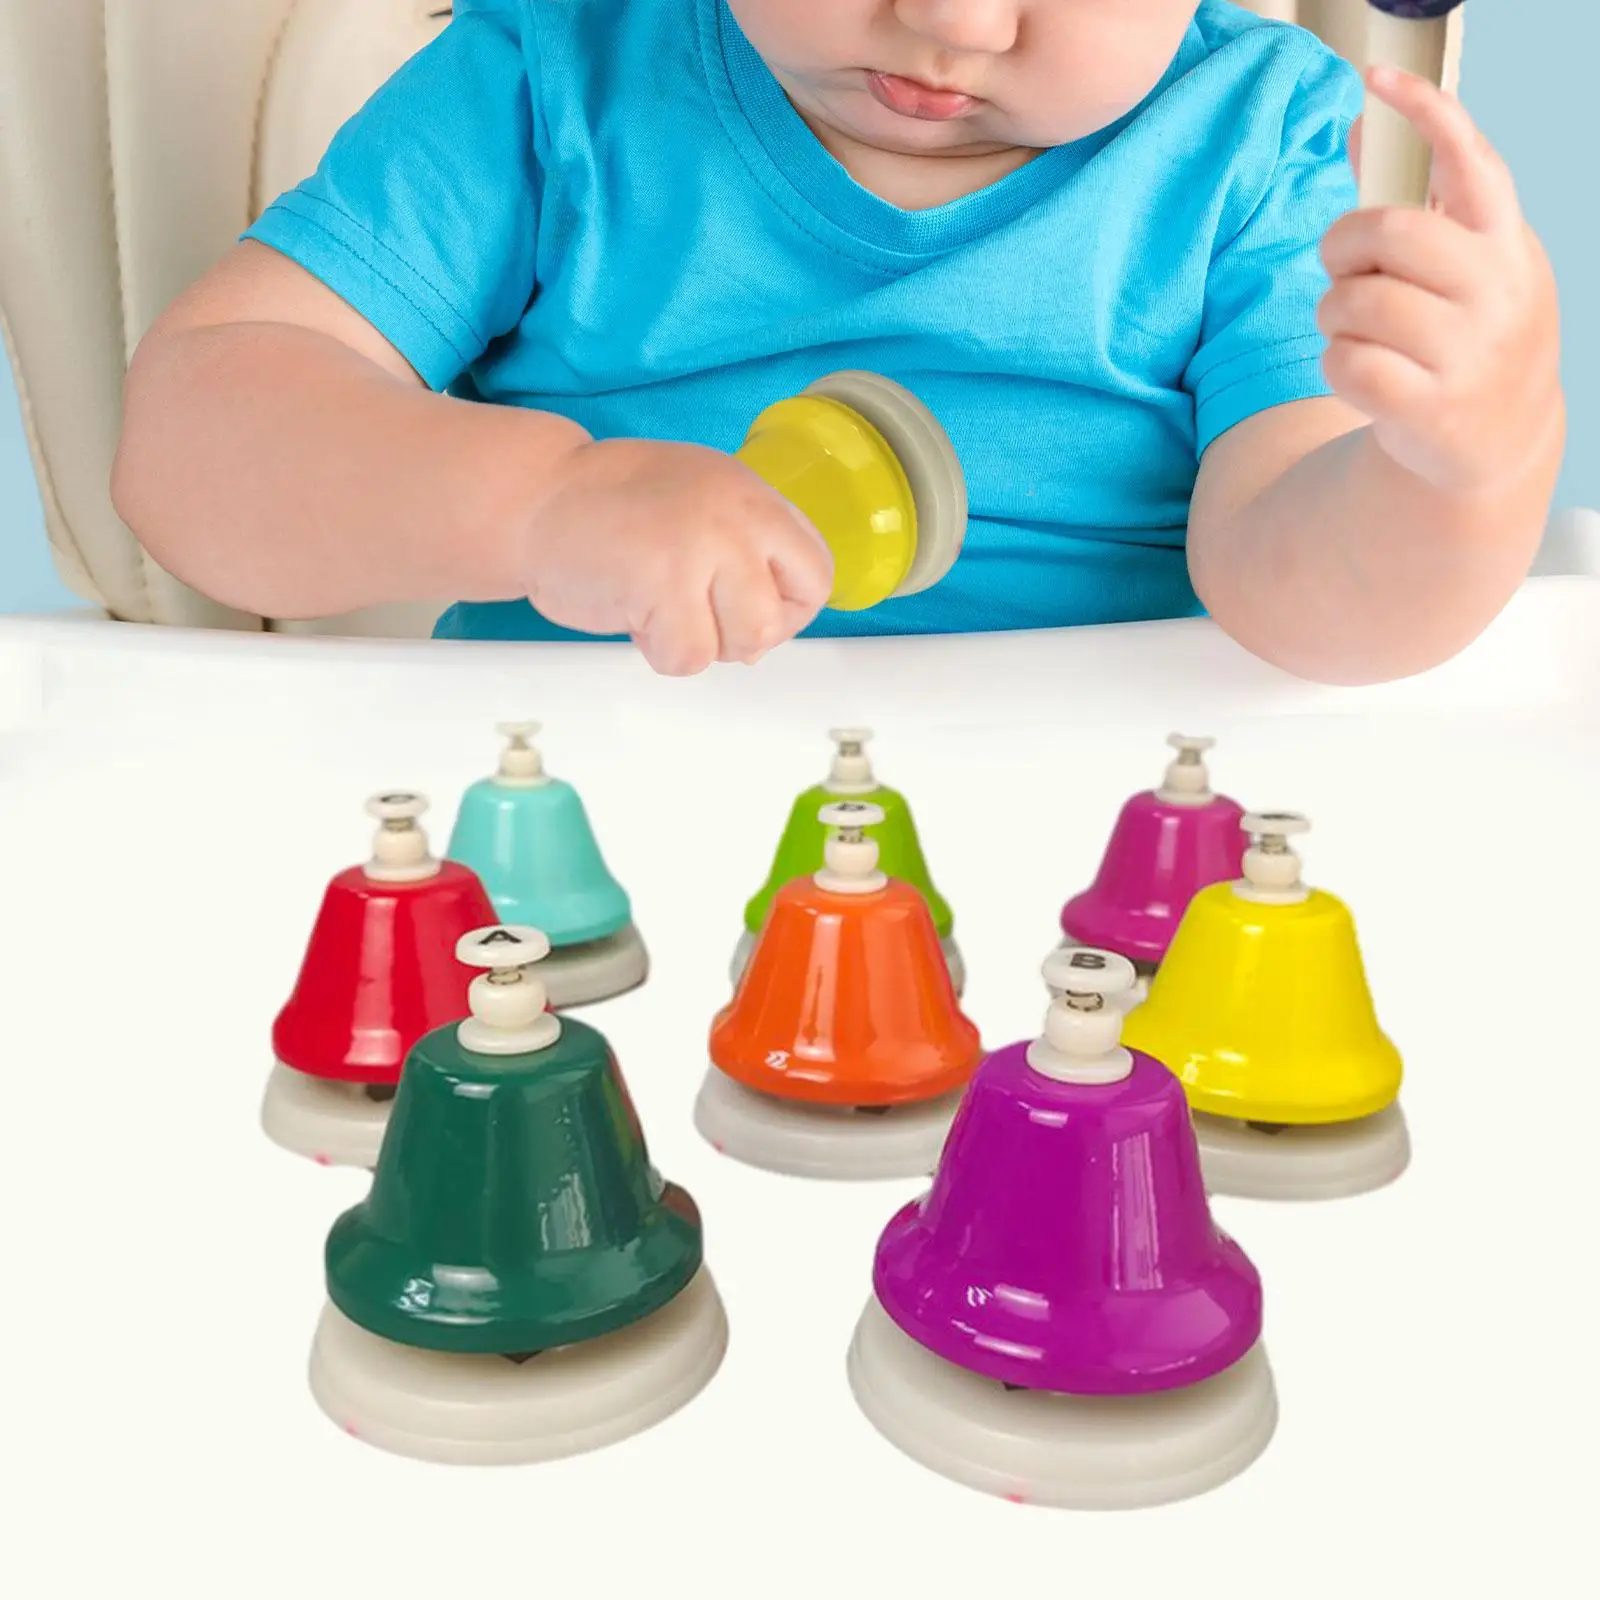 

Desk Bells for Kids Diatonic Chromatic Musical Learning Toys Colorful Percussion Instruments Educational Music Toys for Children